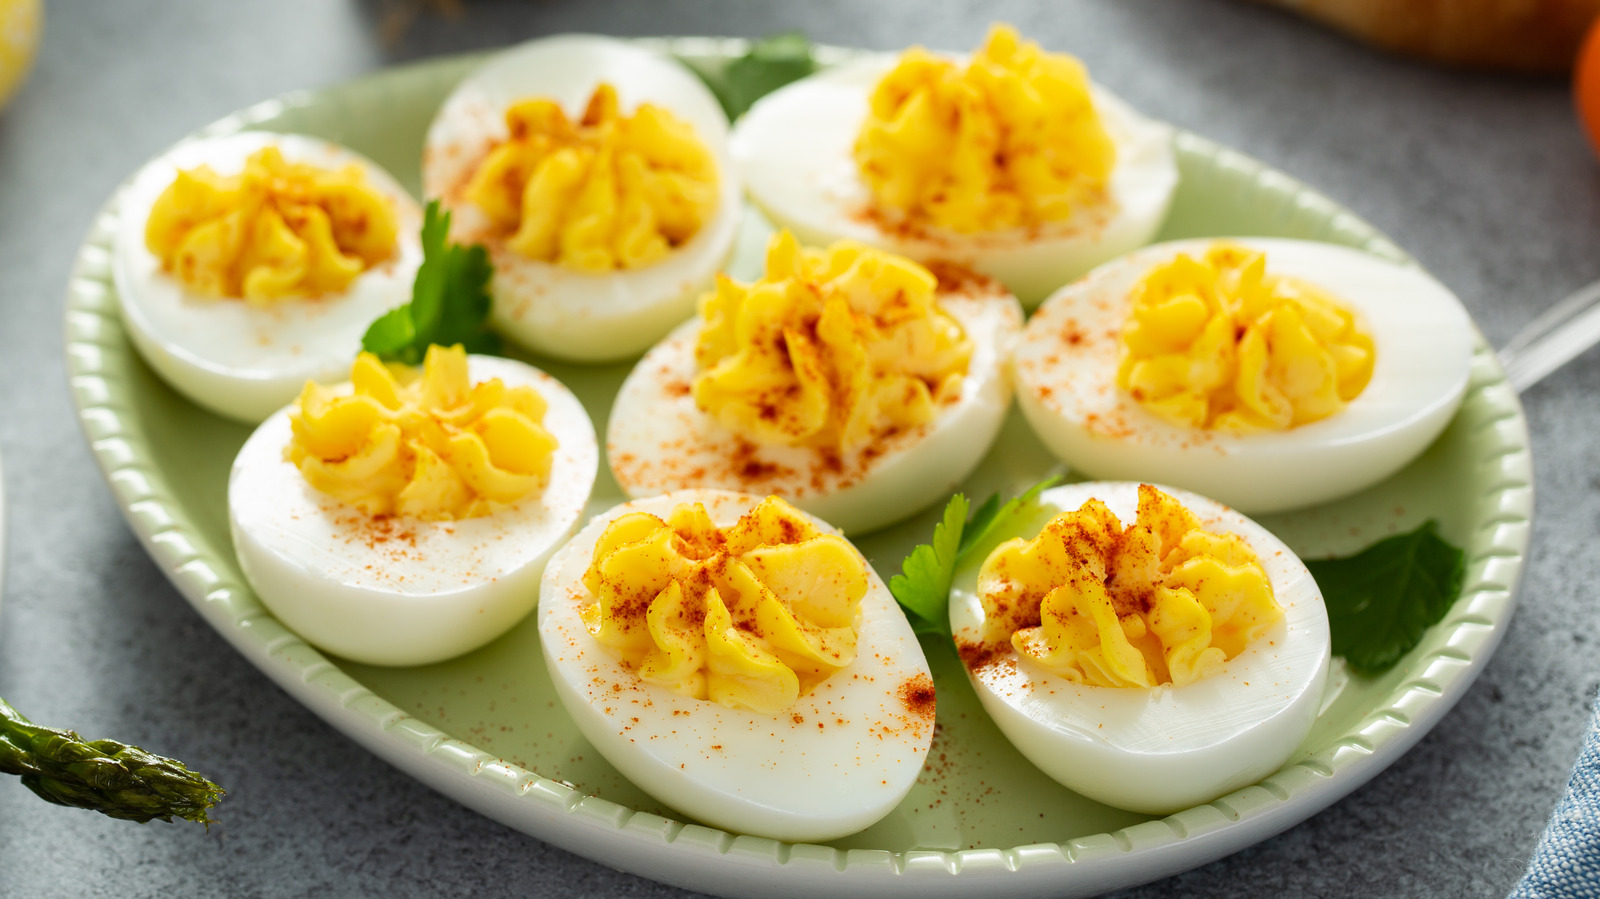 These eggs will level up your dinner! Recipe